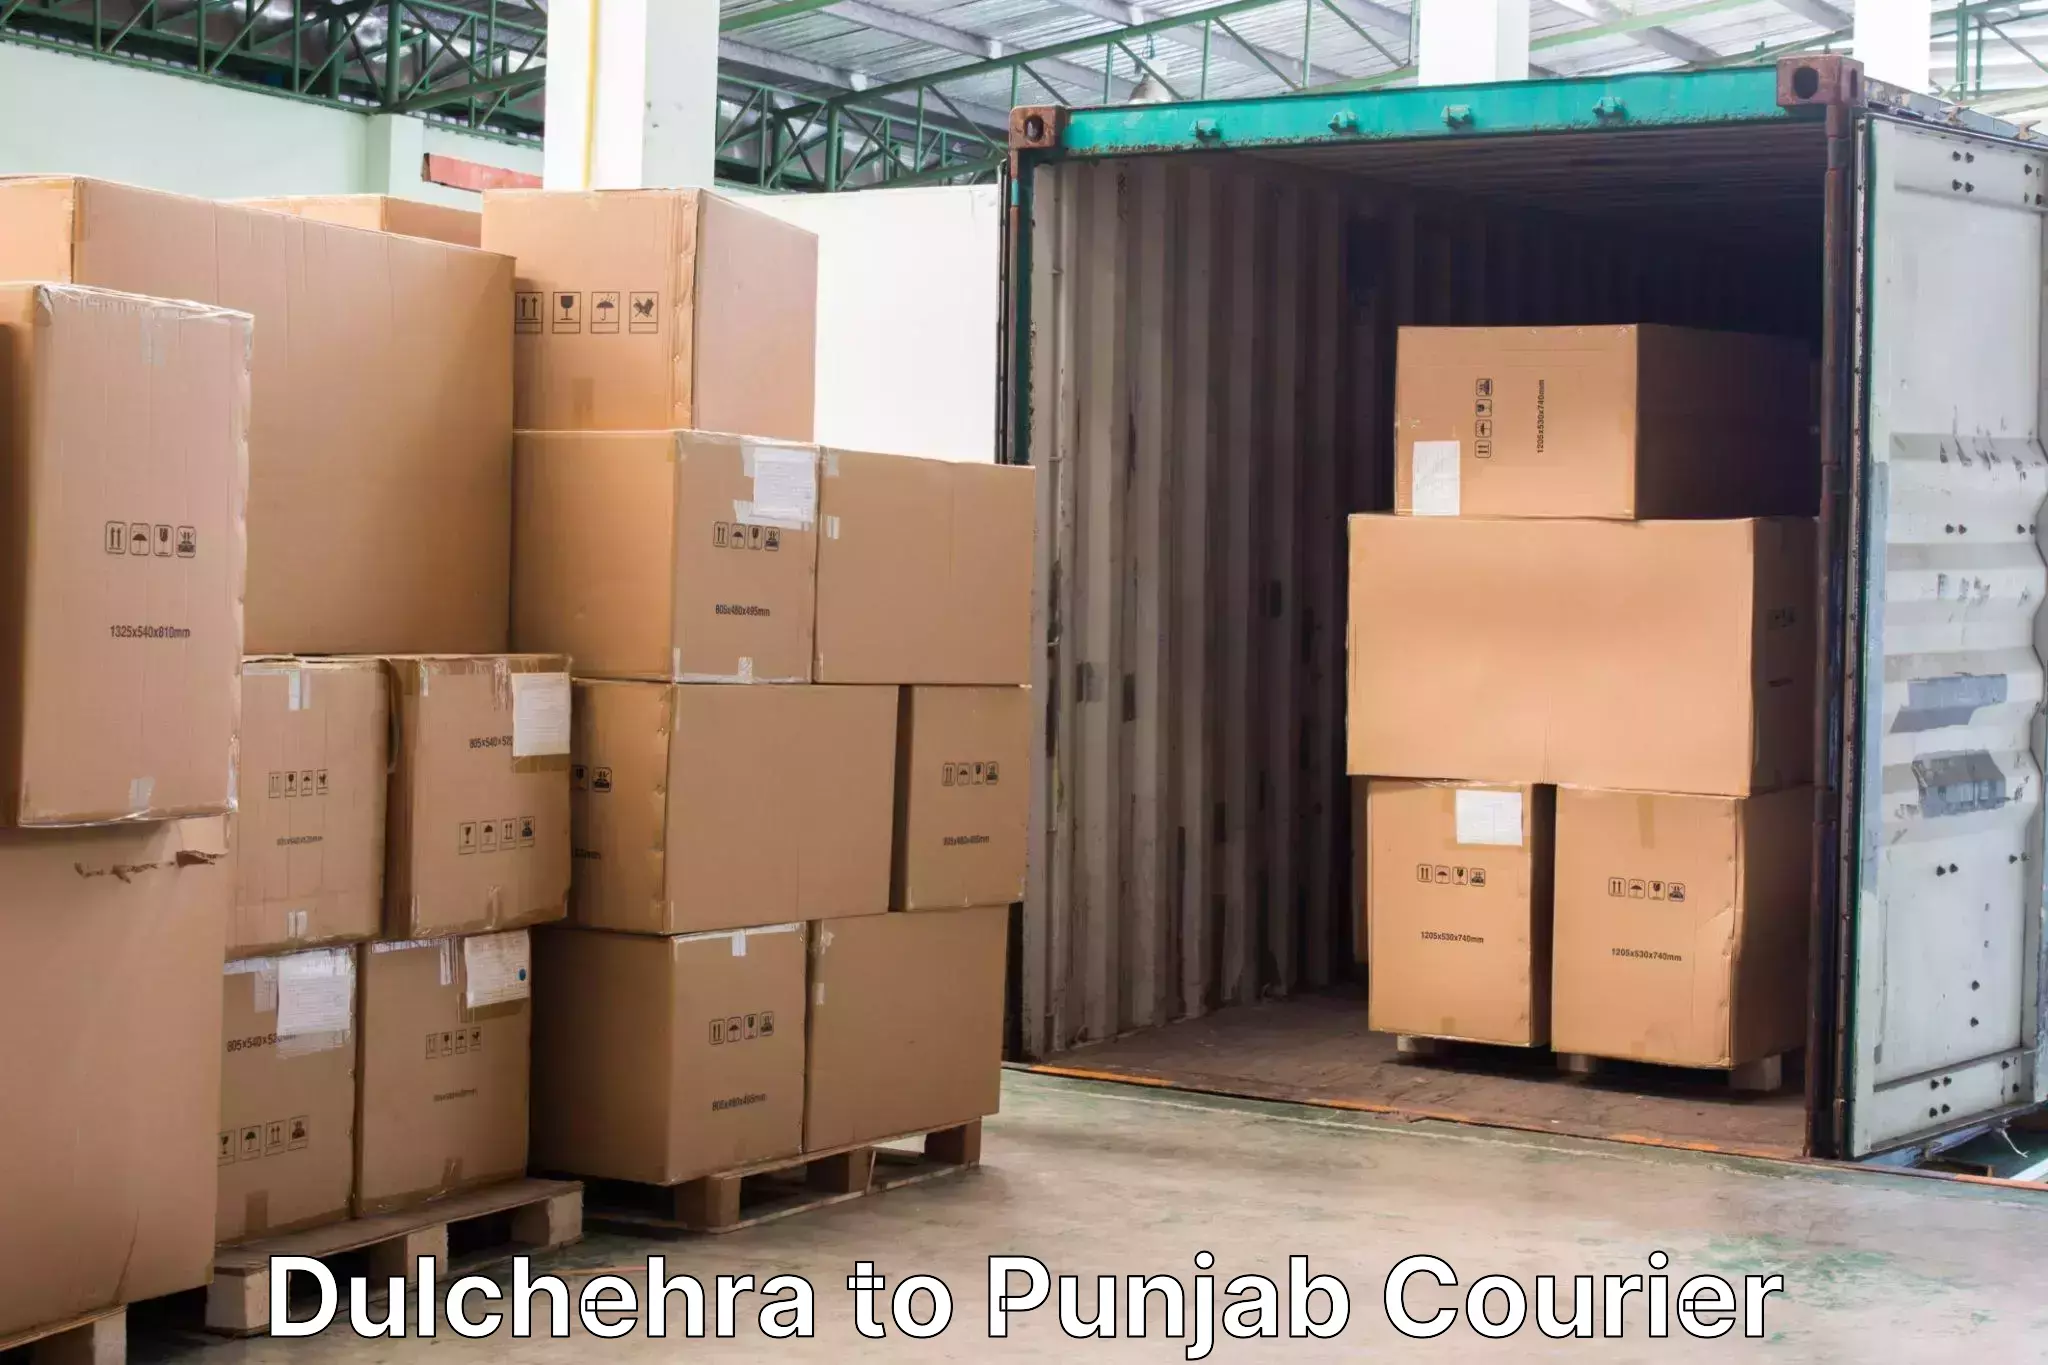 Luggage transport consulting Dulchehra to Dhilwan